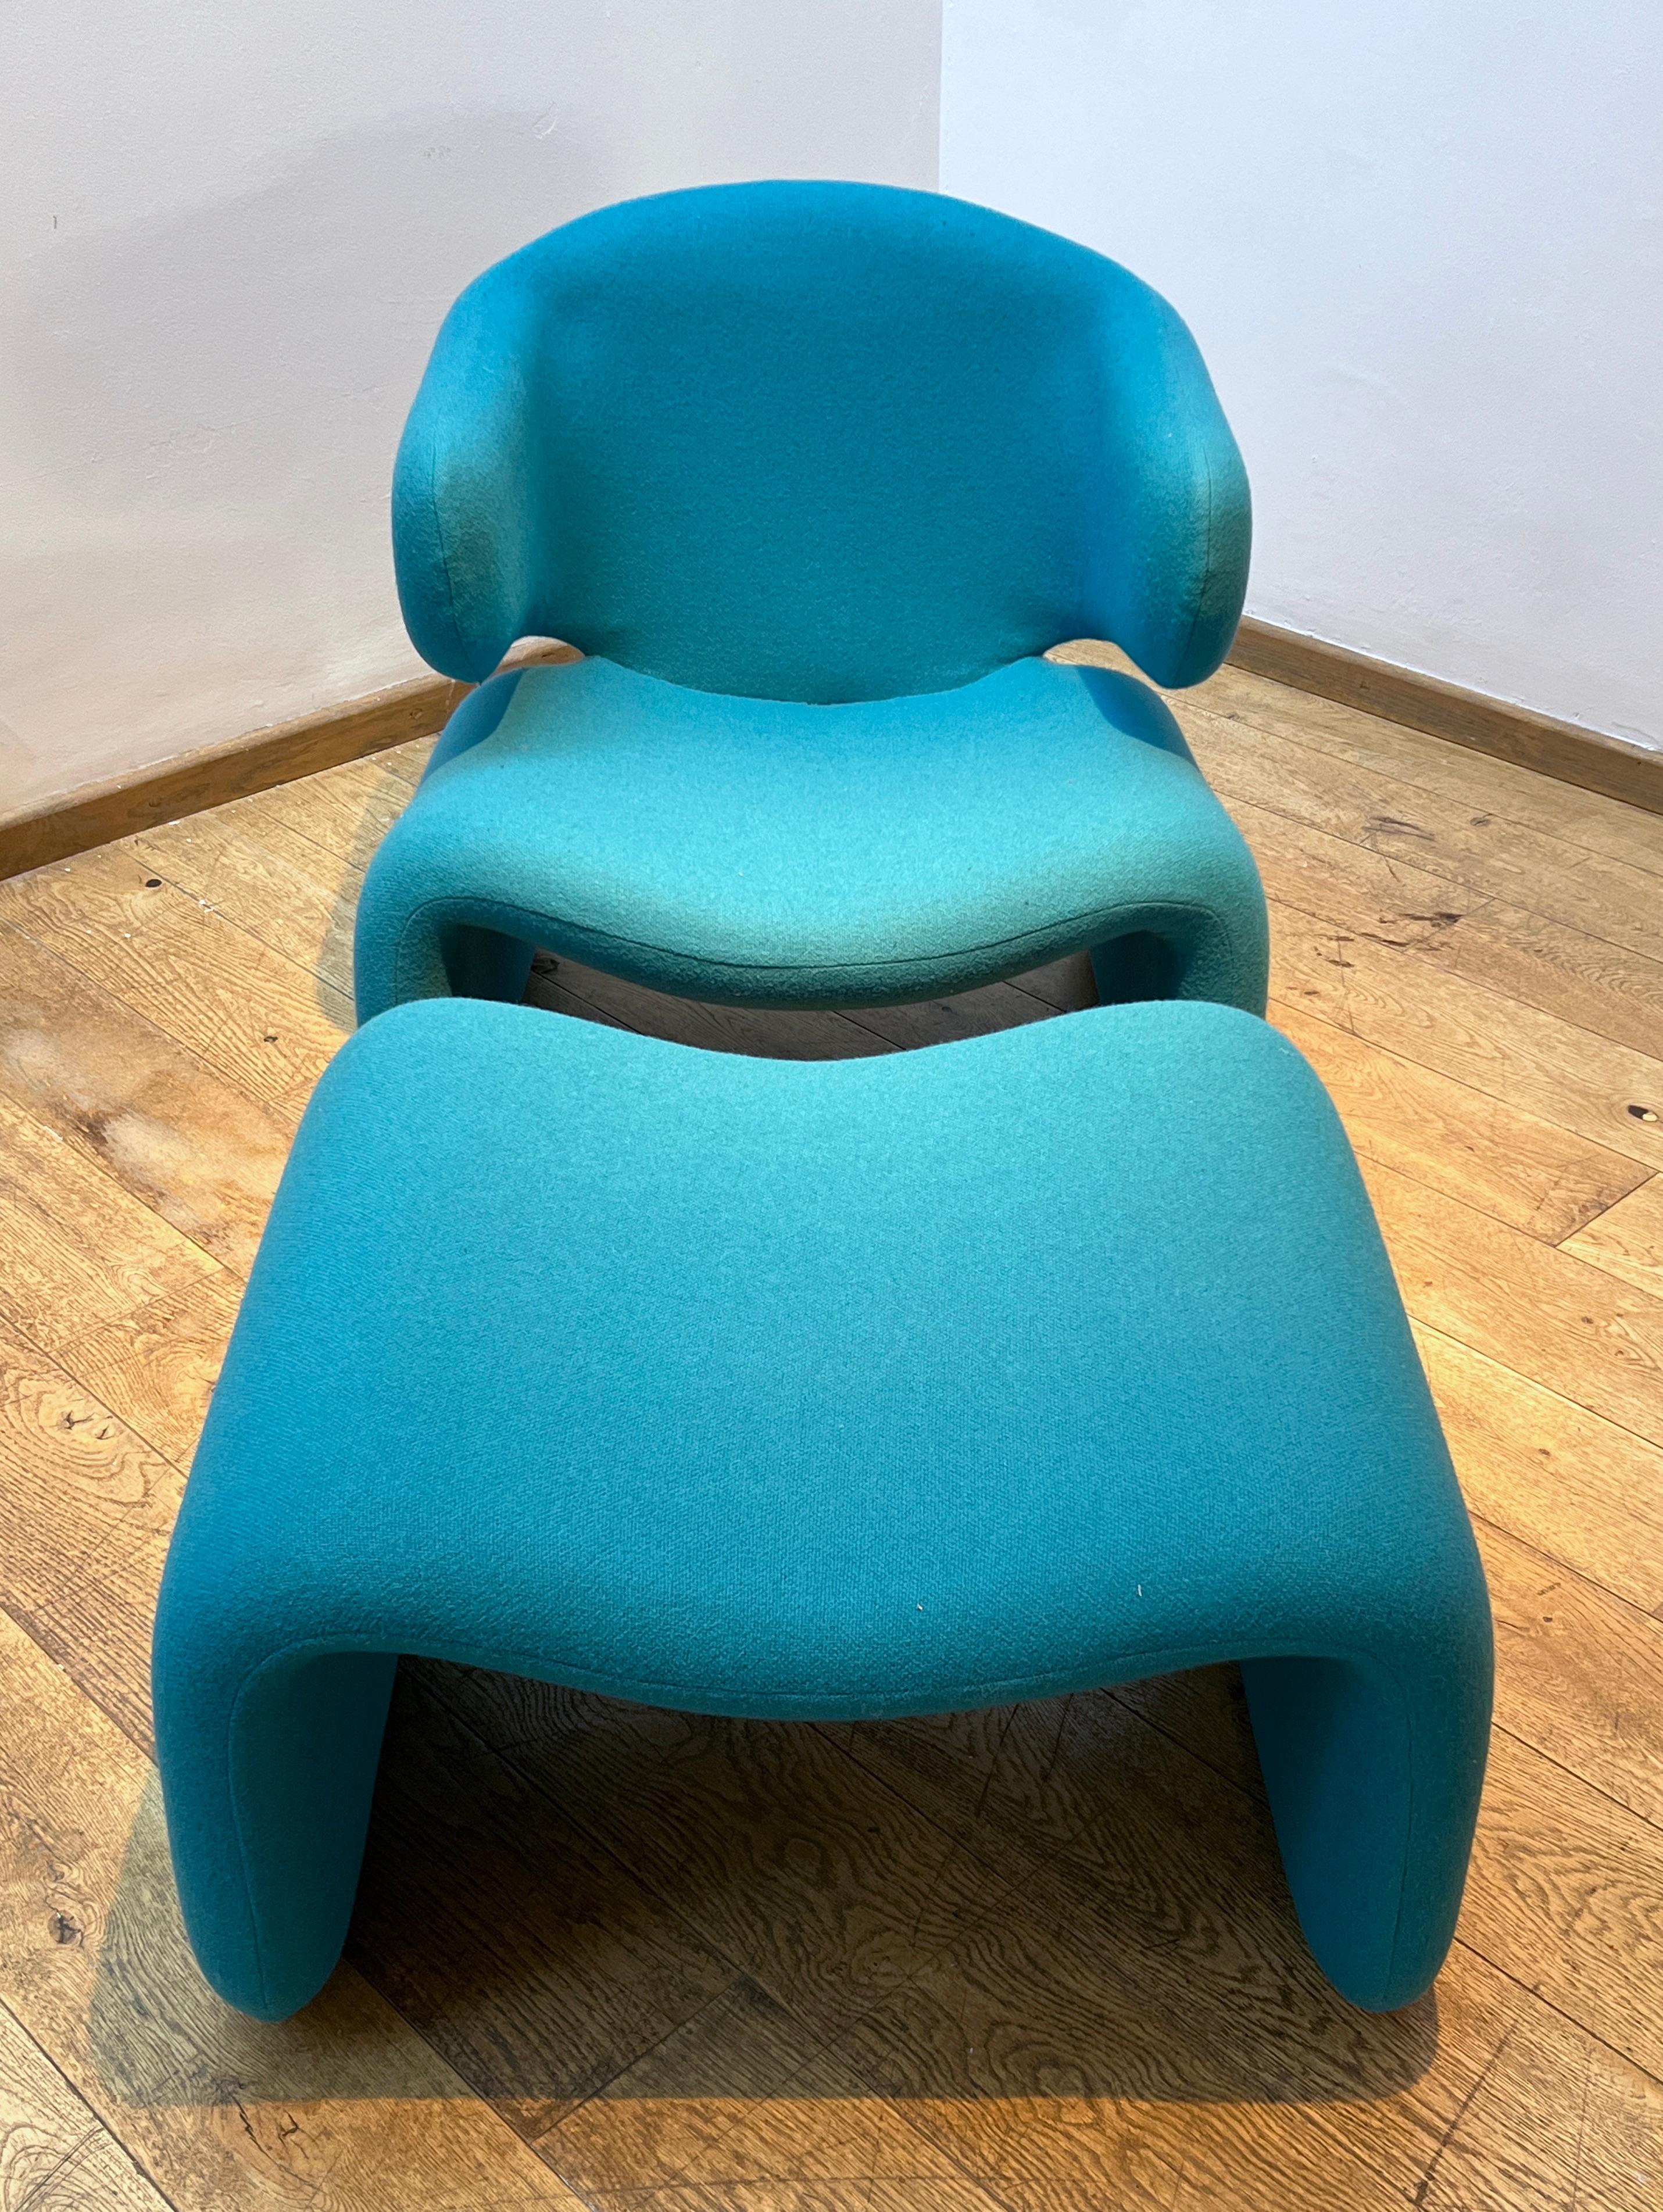 For Airborne, France
From the iconic seating designs by Olivier Mourgue featured in Stanley Kubrick's '2001: A Space Odyssey' in 1968.
Steel frame padded in foam and re-covered in turquoise Kvadrat fabric, on steel bar 'feet'.
Chair: H 66 / W 68 / D